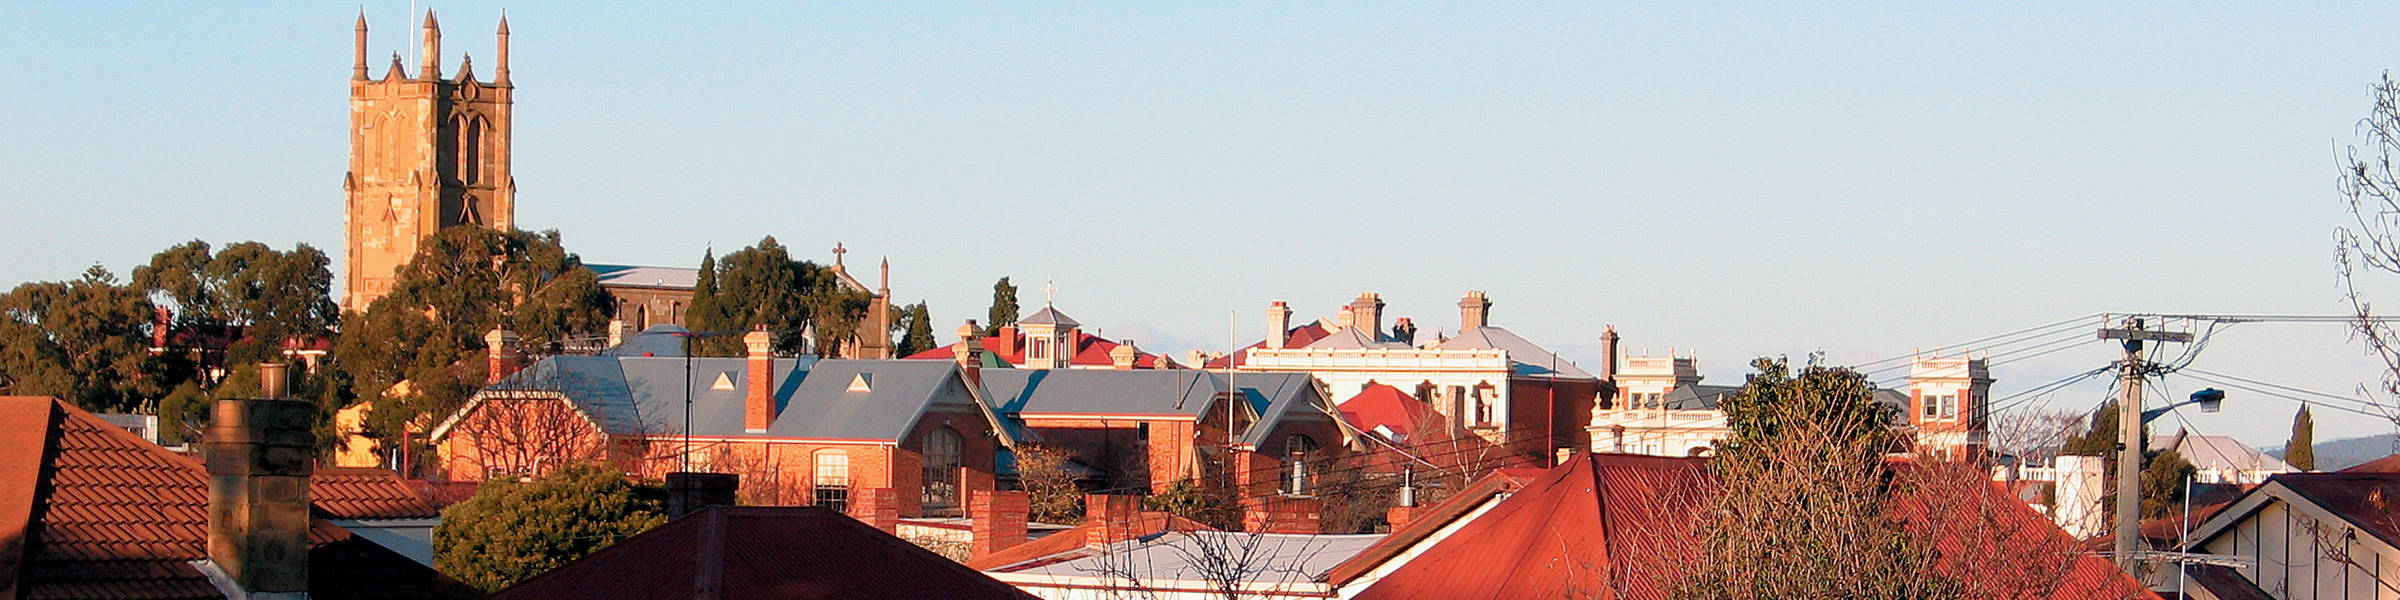 Roofscape looking towards West Hobart.